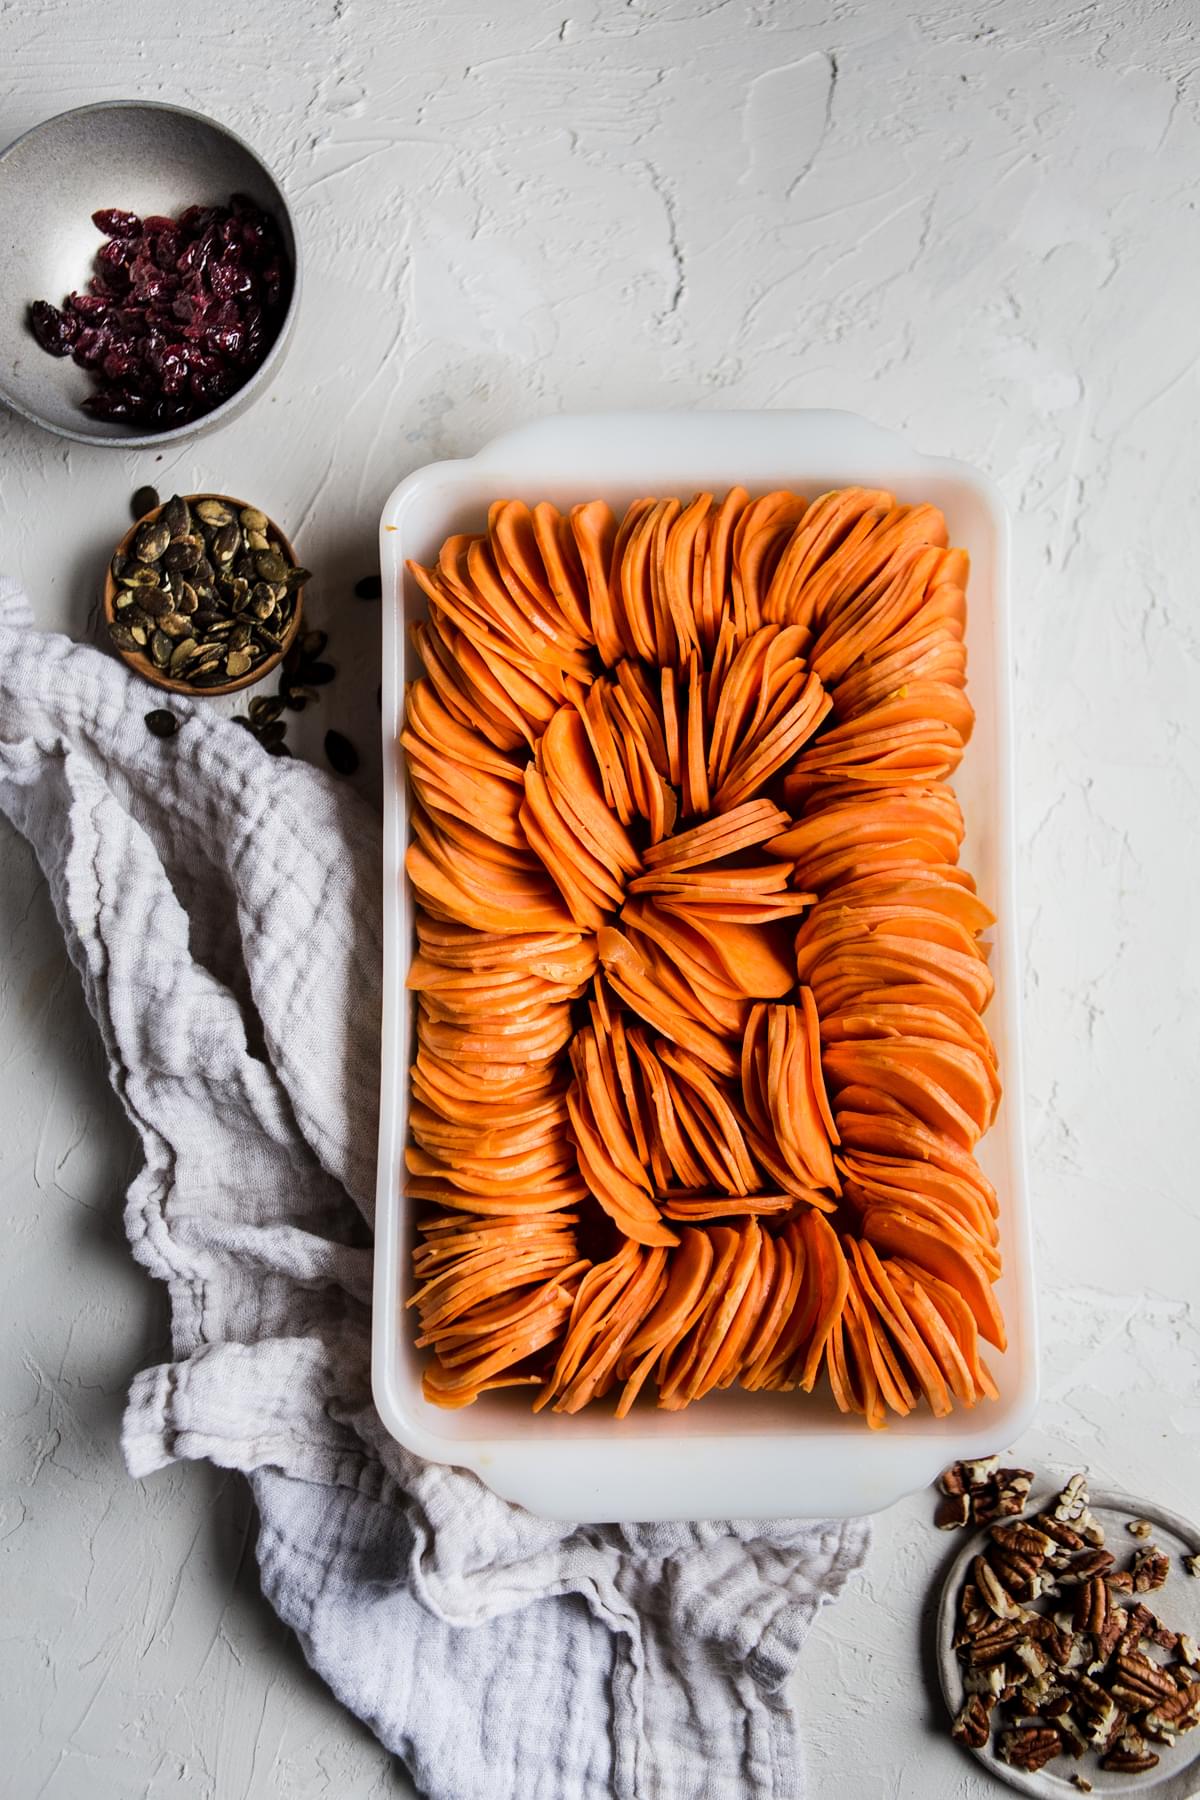 Sweet potato slices arranged in a baking dish next to bowls of dried cranberries, pumpkin seeds and pecans